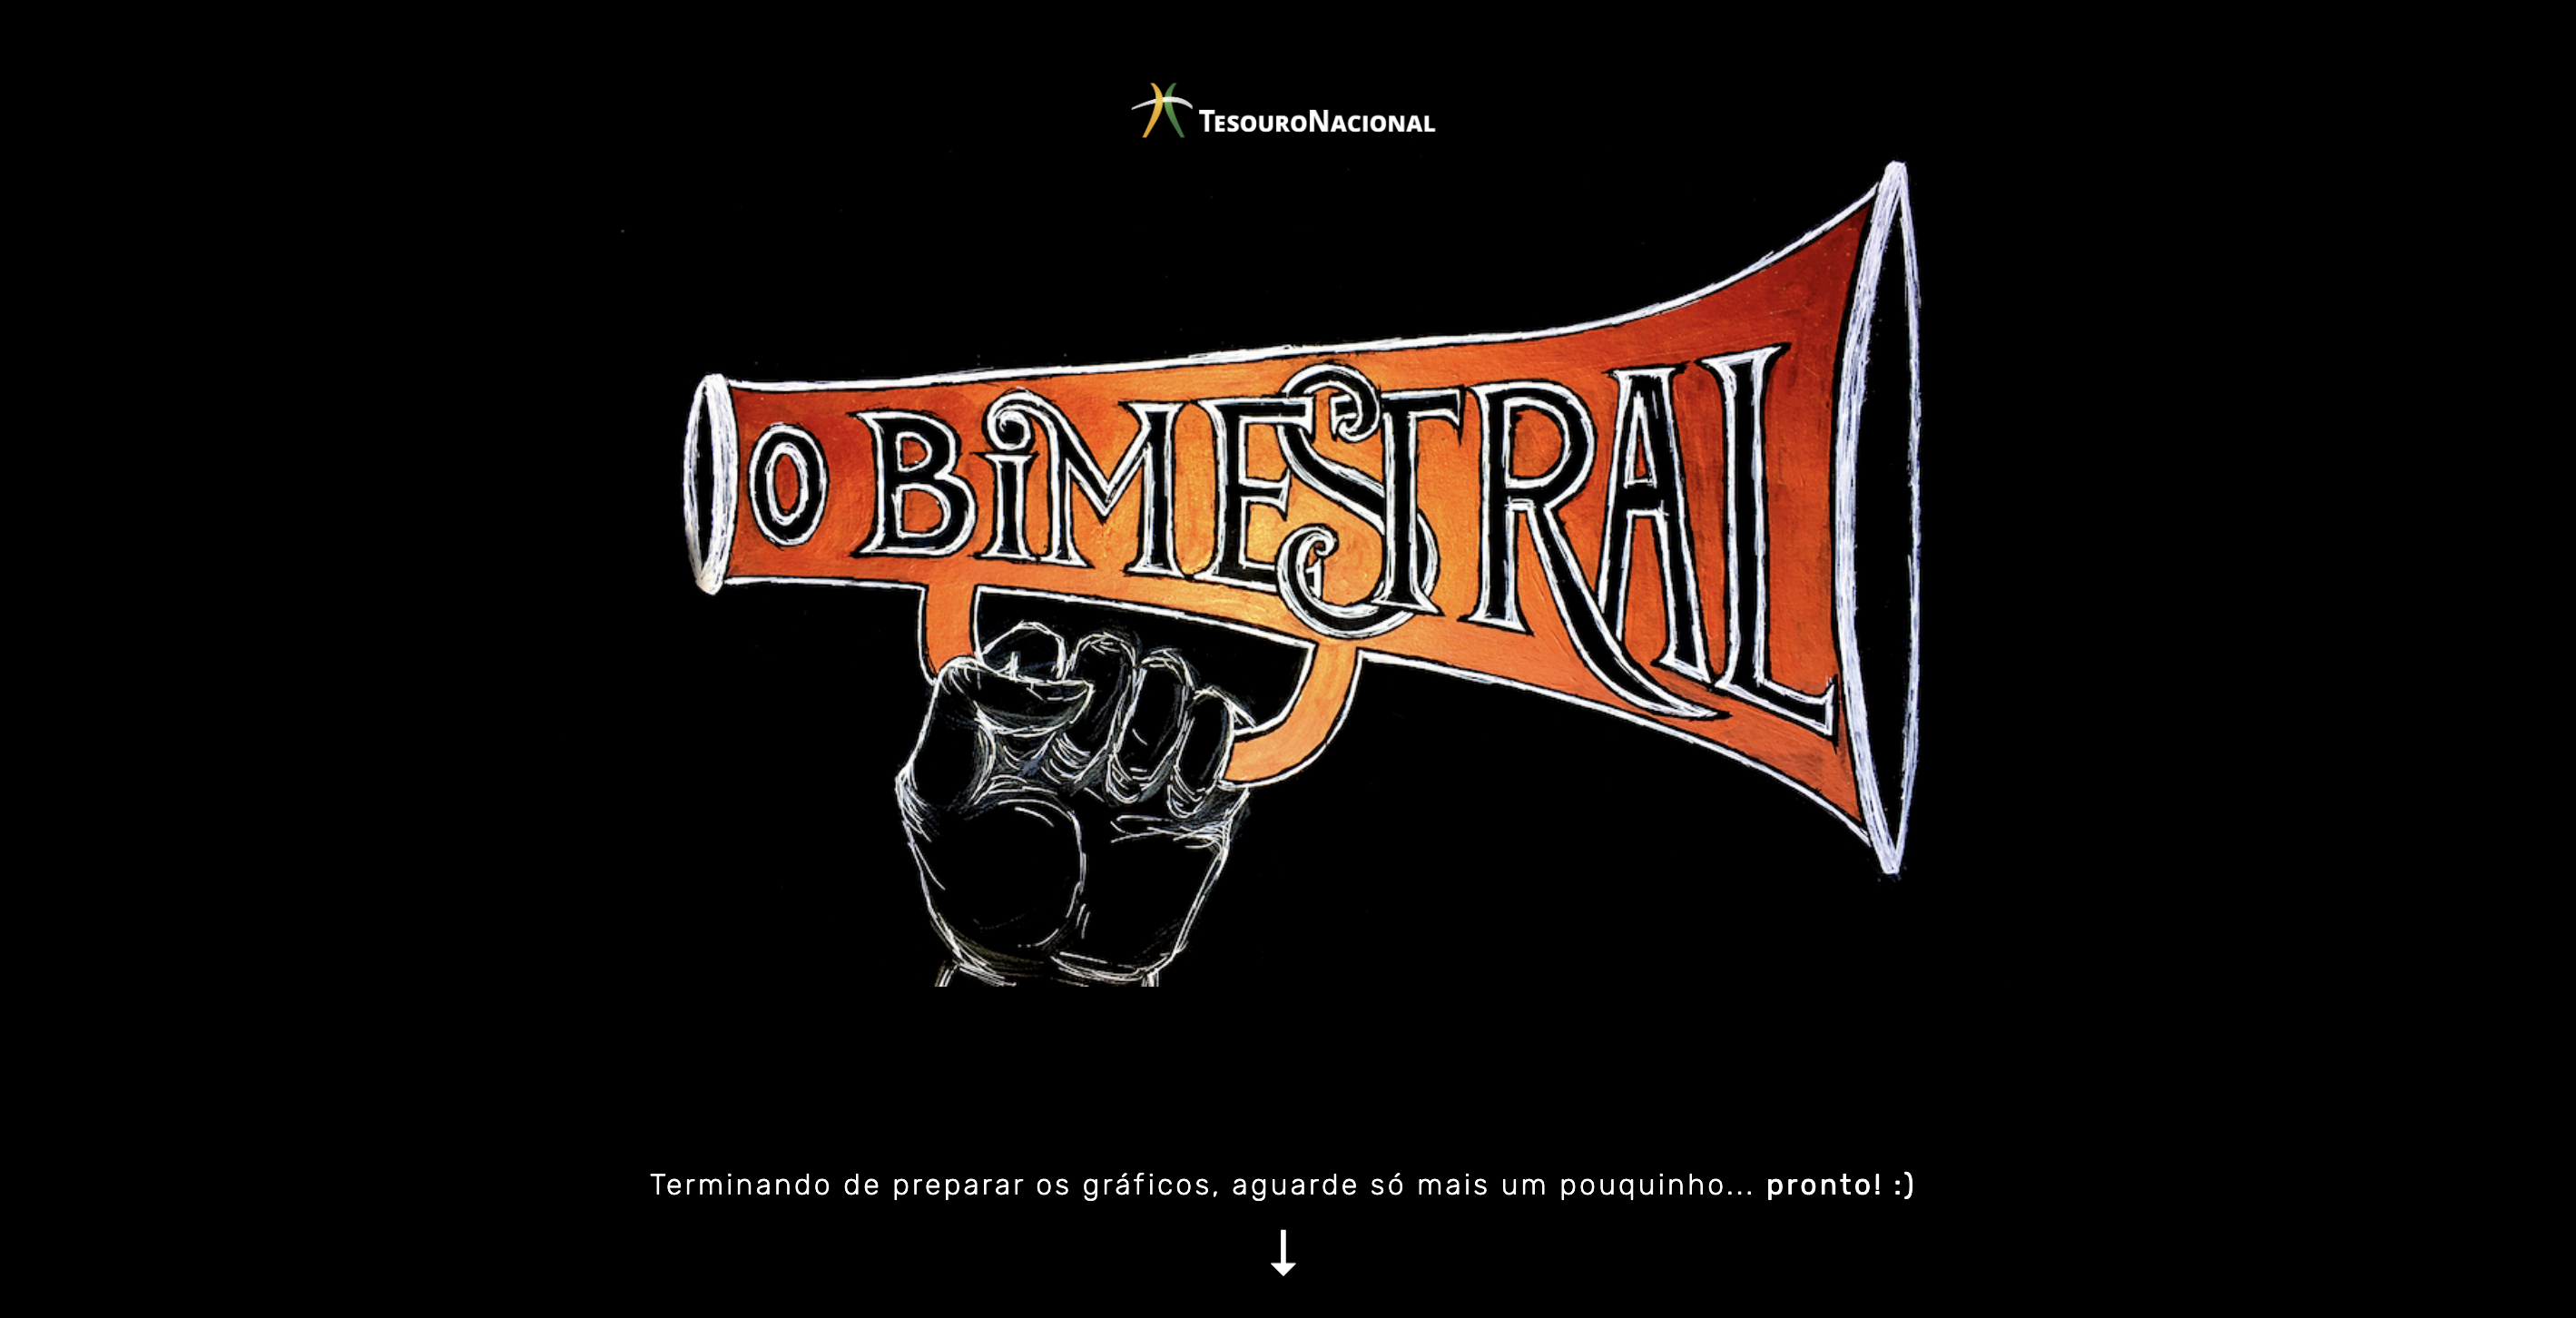 A snapshot of the project's opening screen, with the text 'O Bimestral' with a beautiful artwork.